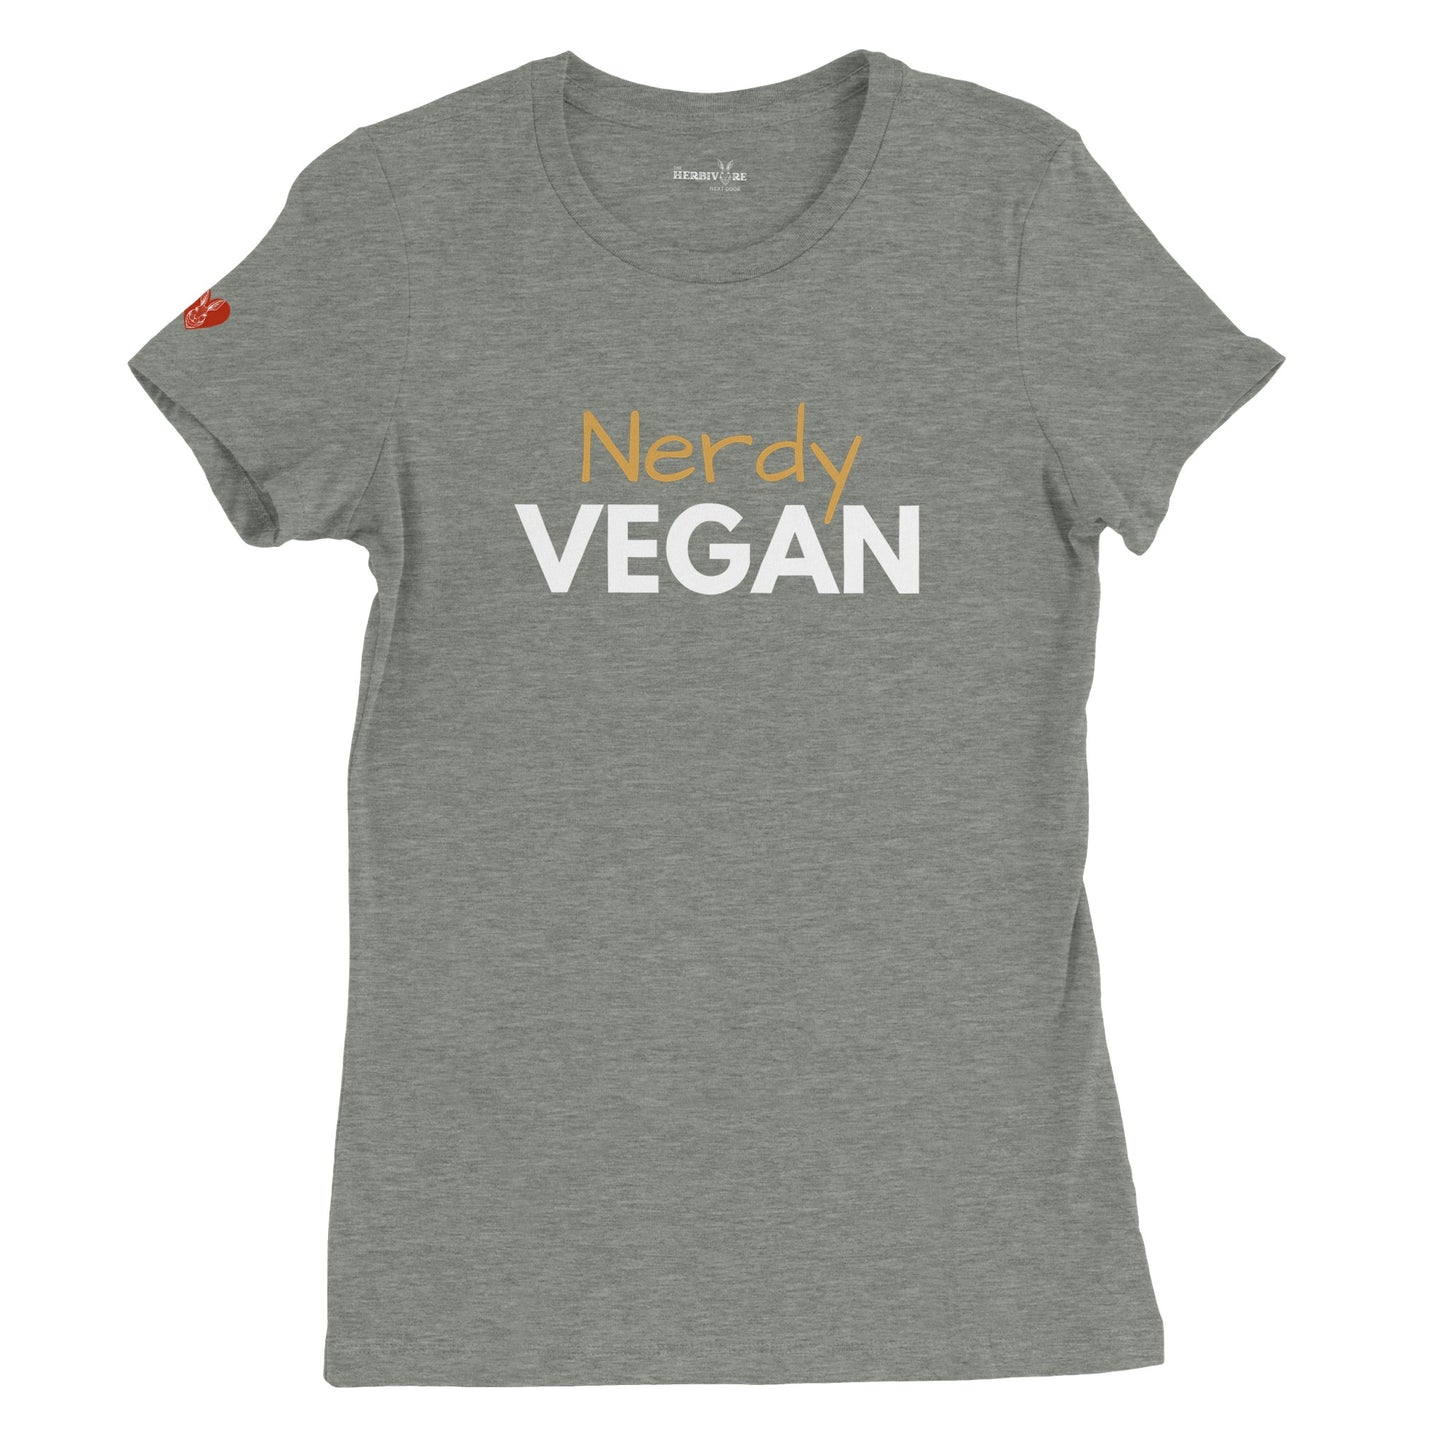 Nerdy Vegan - Women's Style (Women's run small - get one size up from normal unisex)